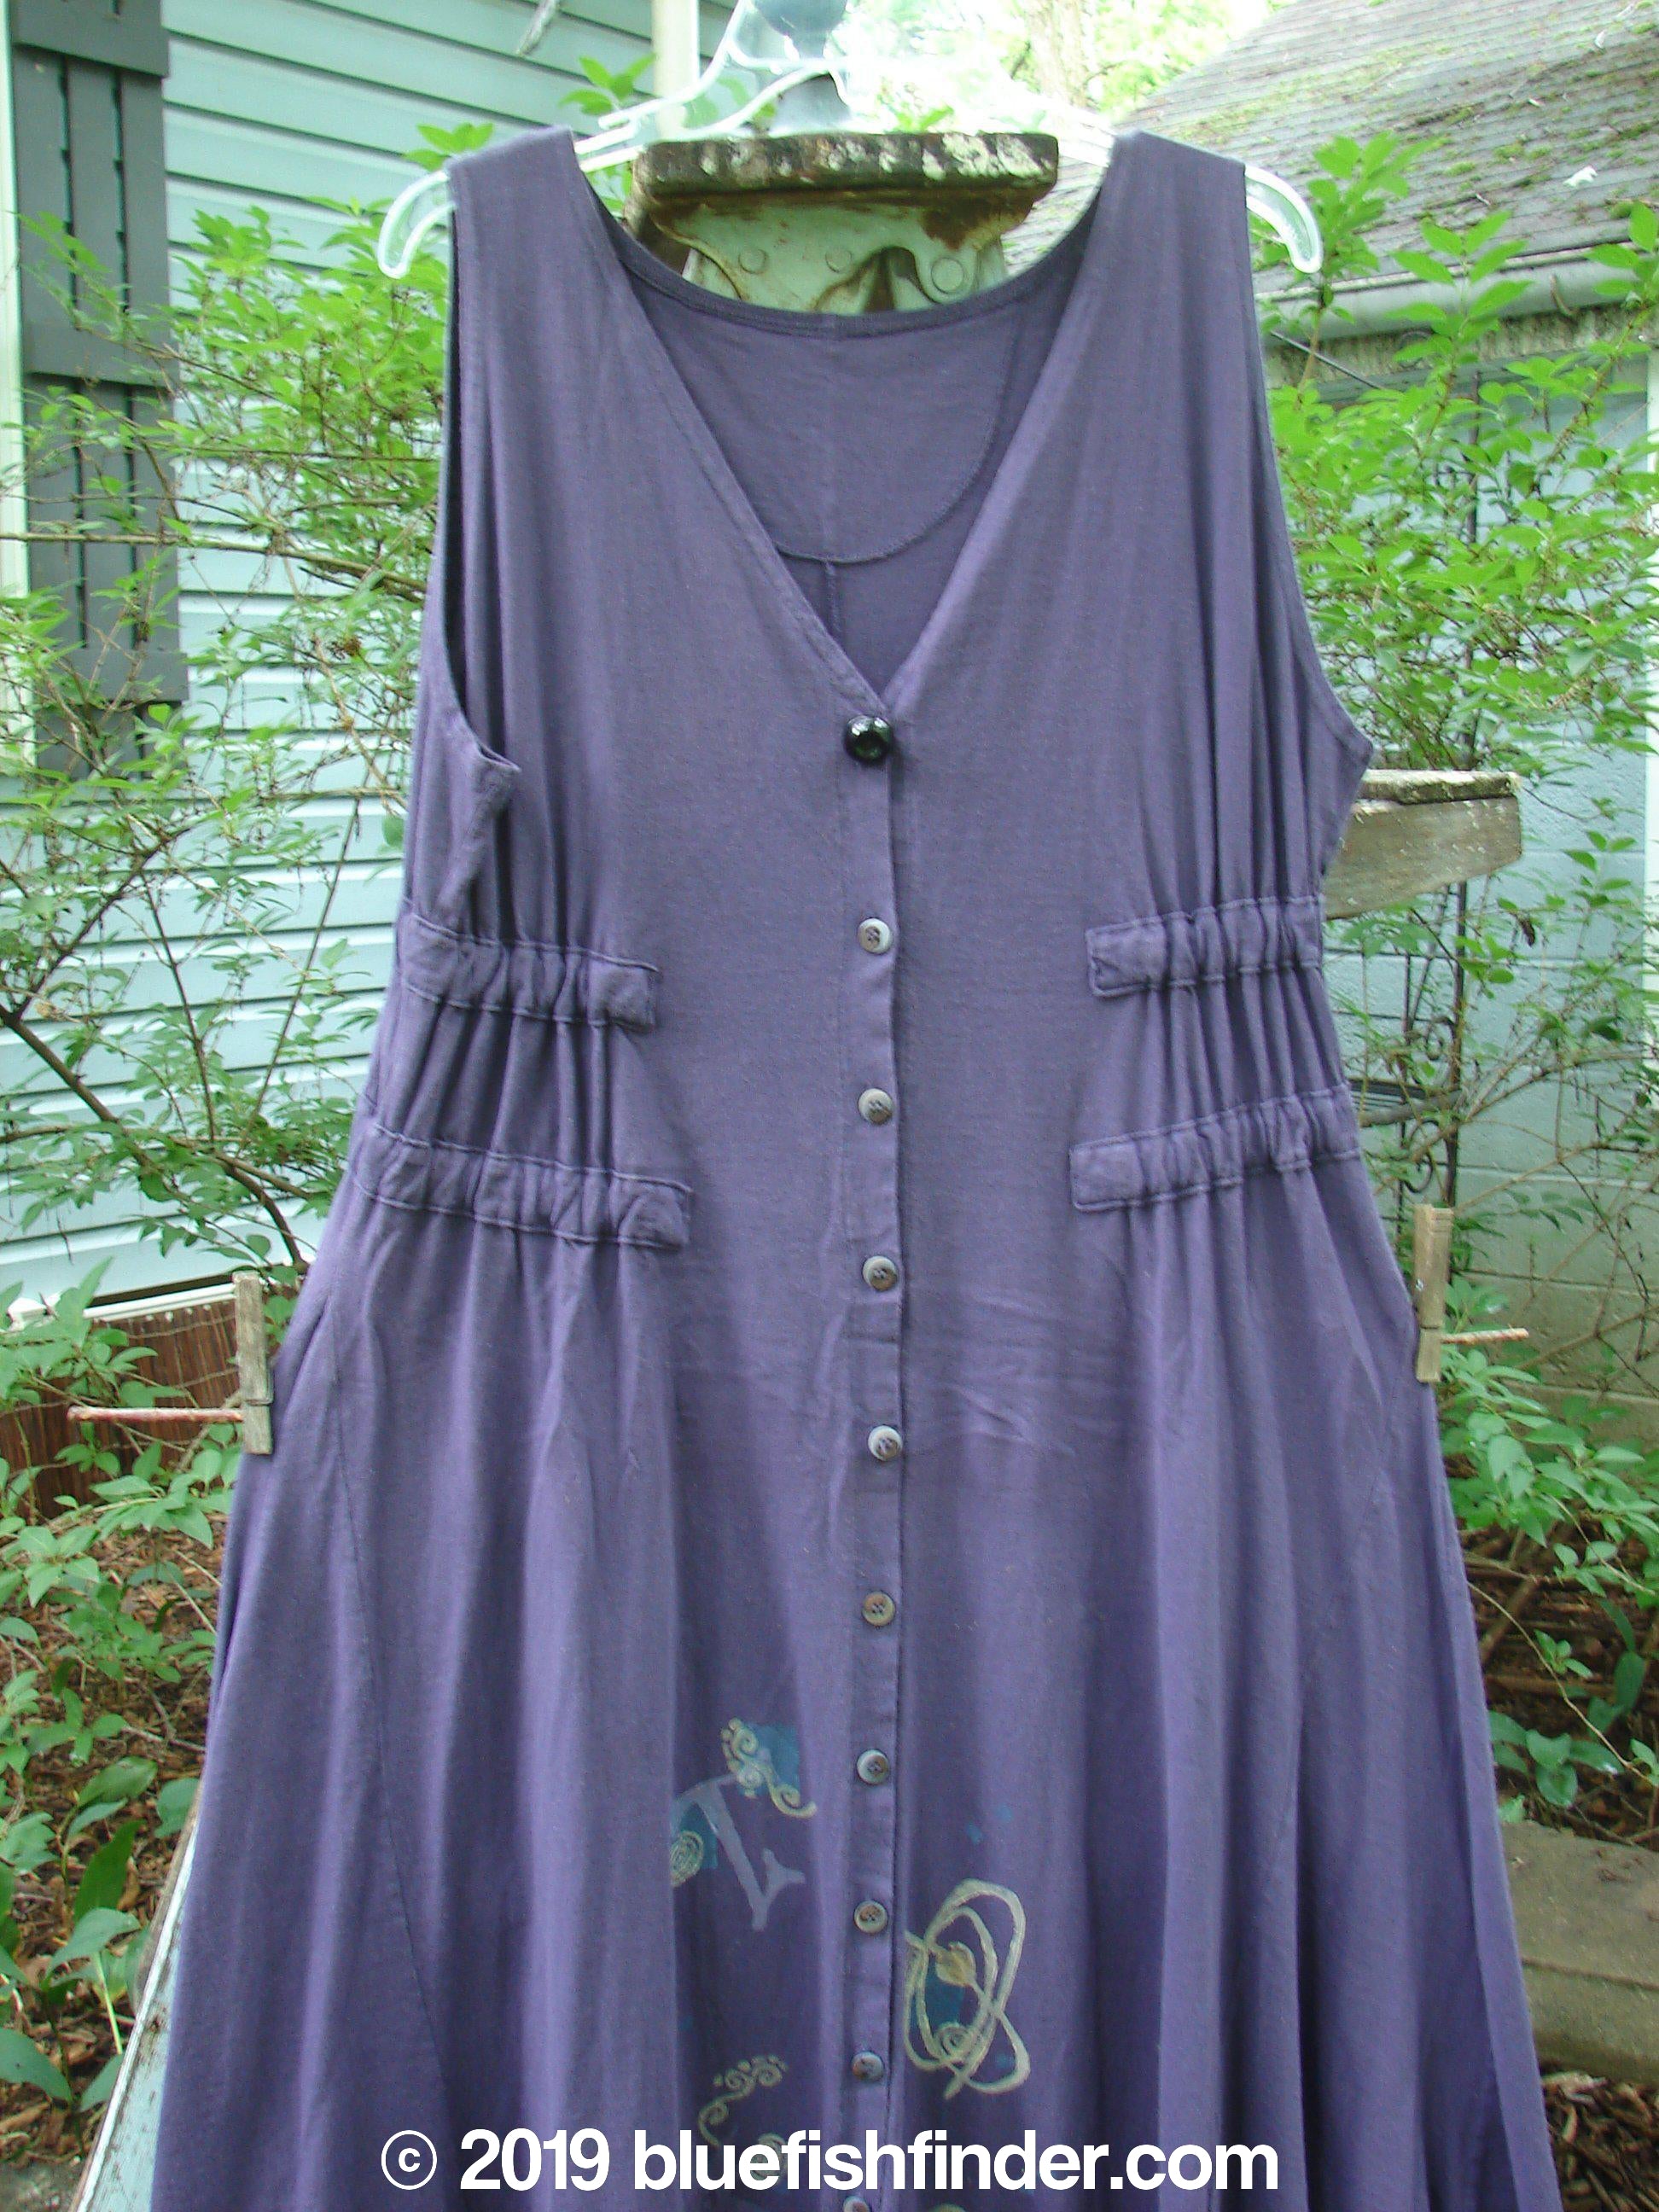 A 1994 Spin Jumper in mixed purple nuit, size 2. Features include an empire waist, tie tunnels, V-shaped neckline, and sweeping hemline.